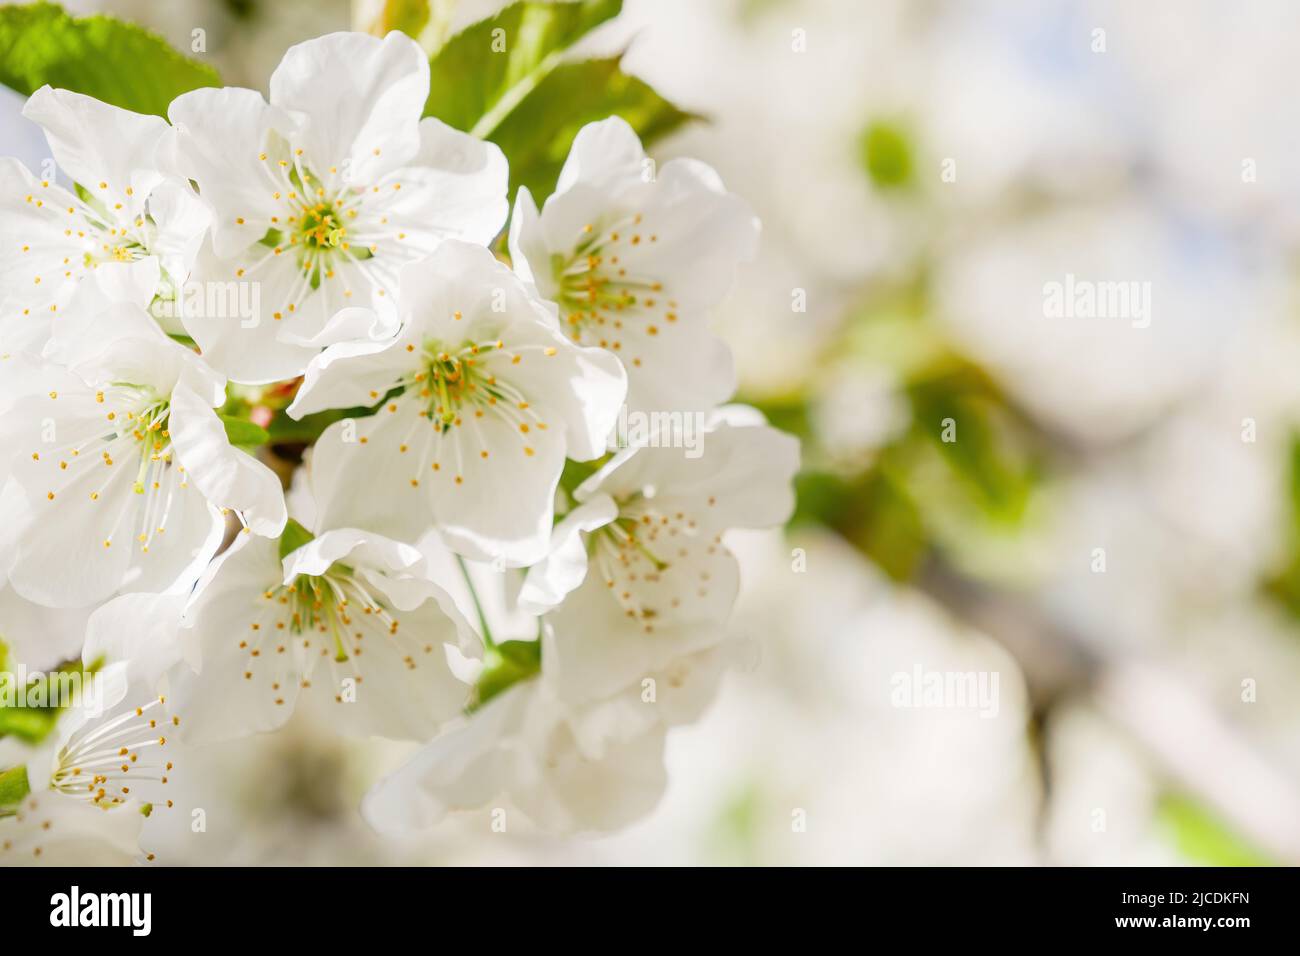 Blossoming apple tree background Stock Photo